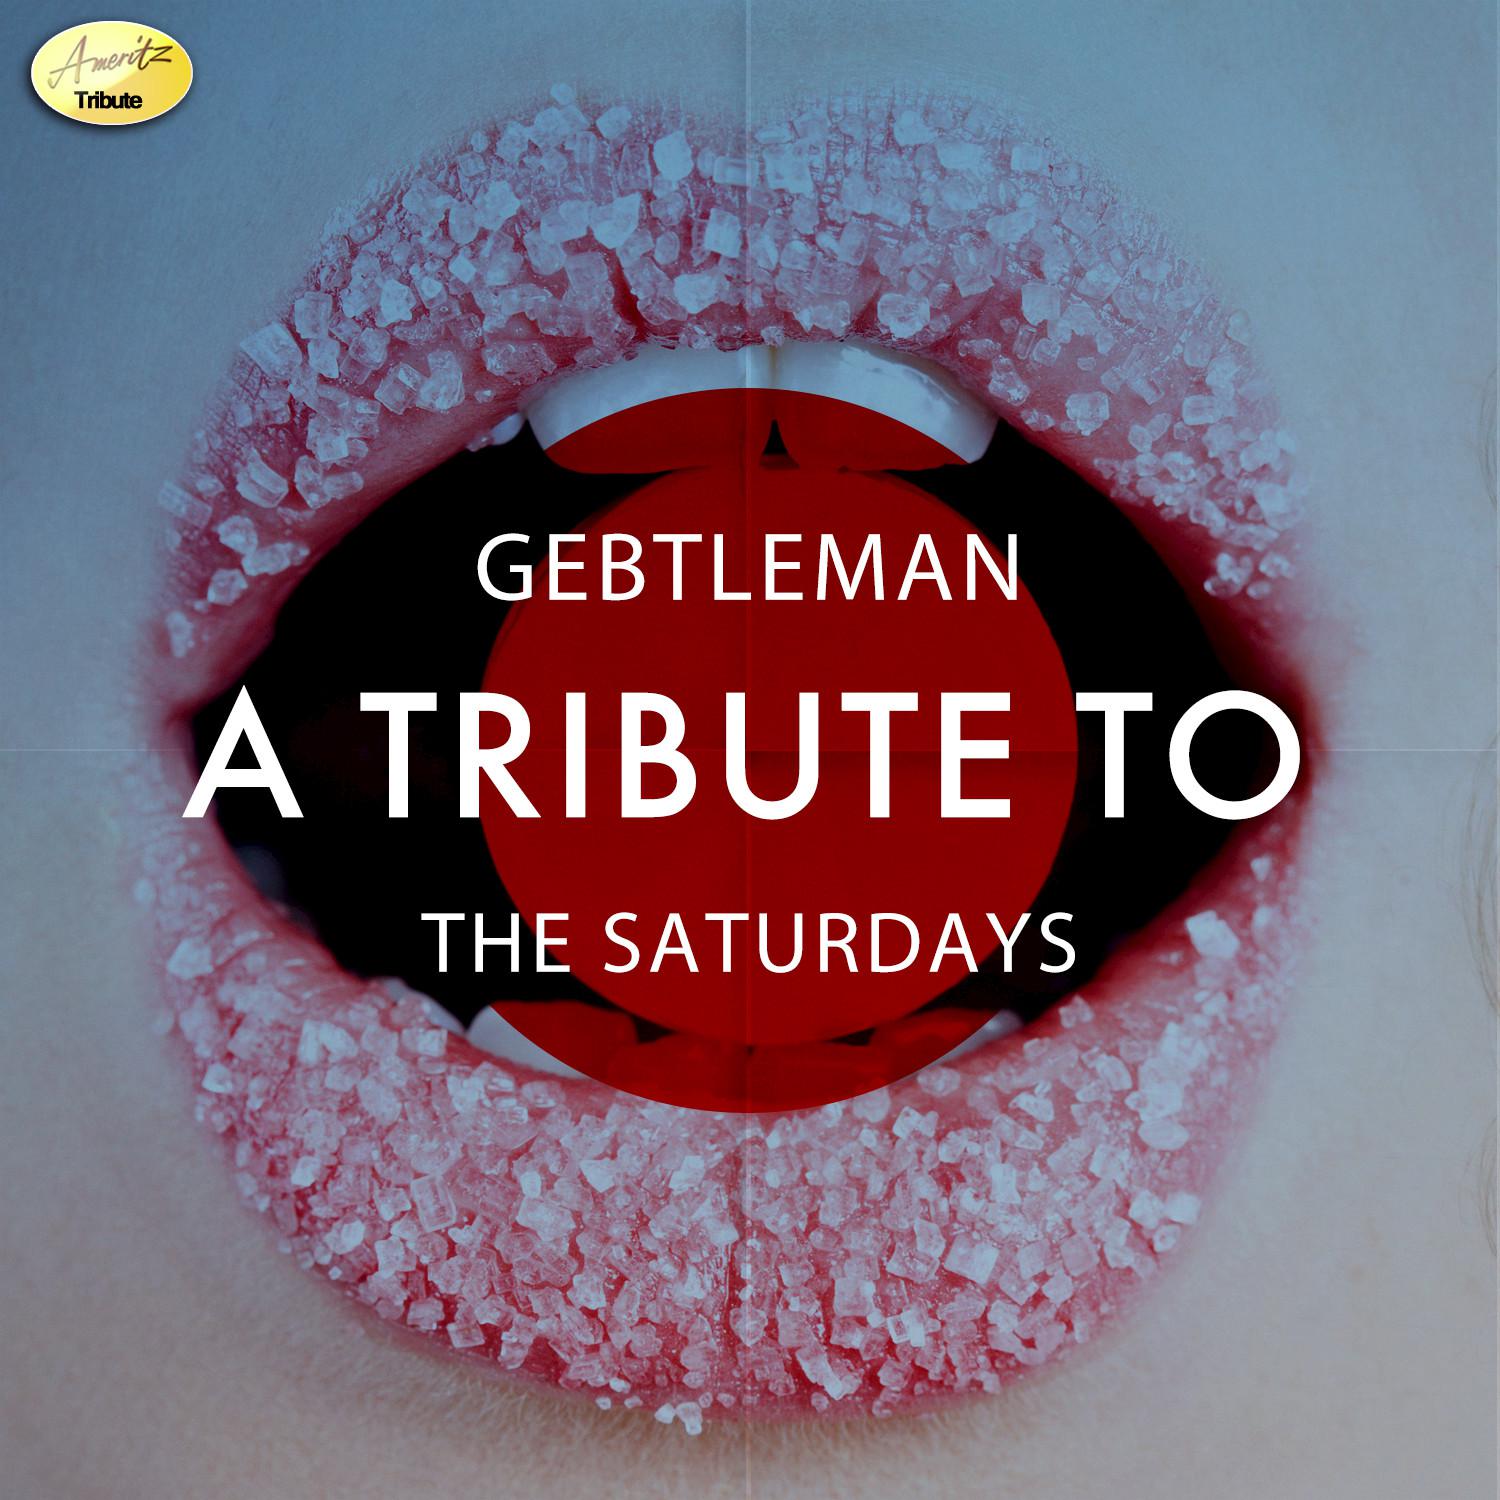 Gentleman: A Tribute to The Saturdays